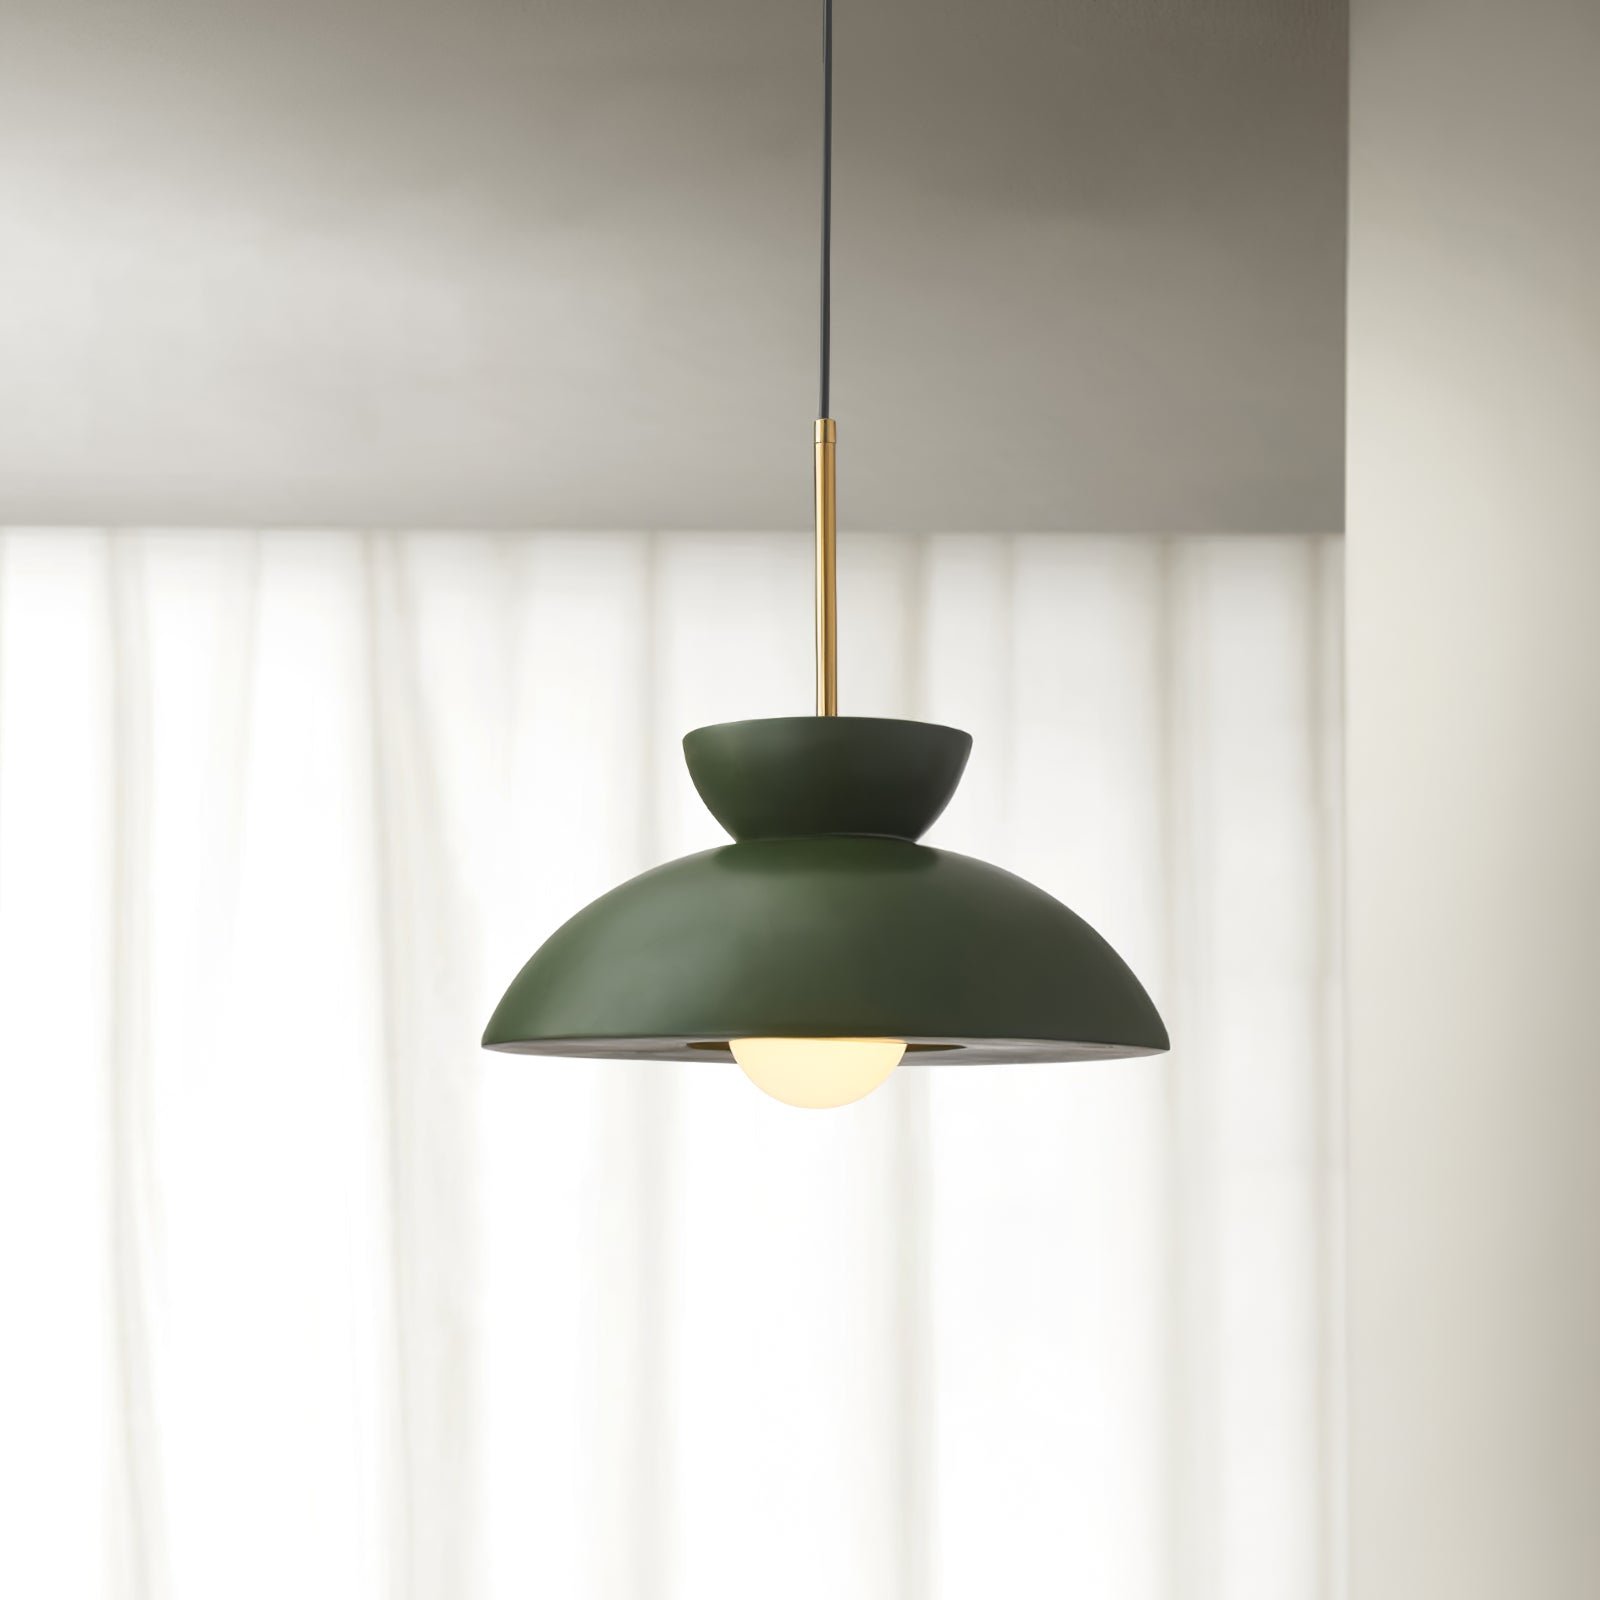 Green Veepee Pendant Lamp - Diameter 13.3 inches x Height 6.2 inches (34cm x 16cm)